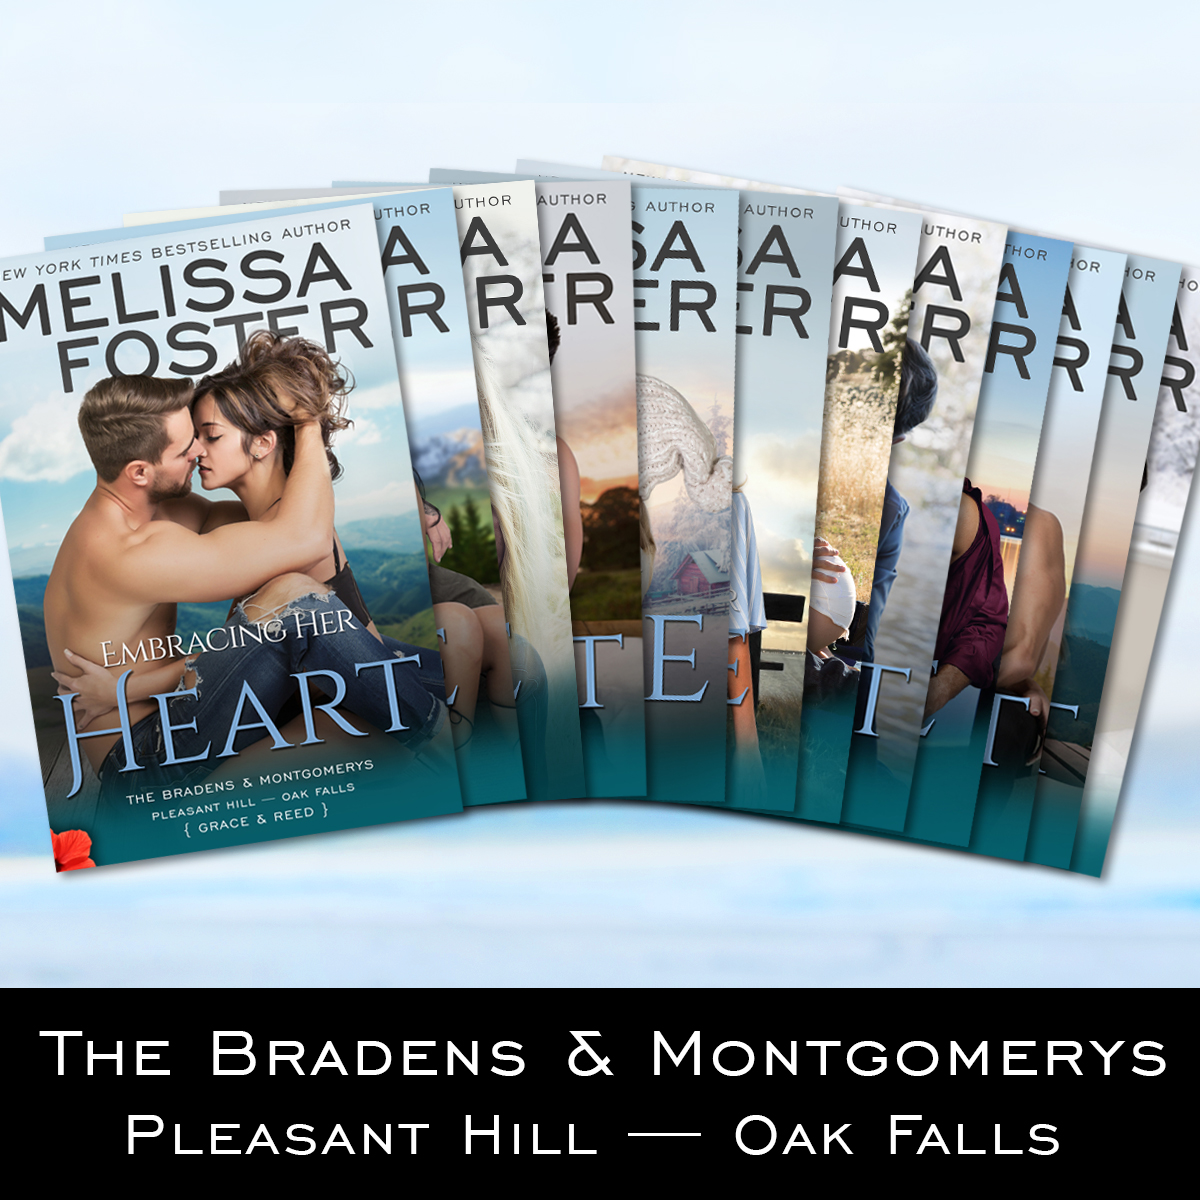 The Bradens and Montgomerys series by Melissa Foster